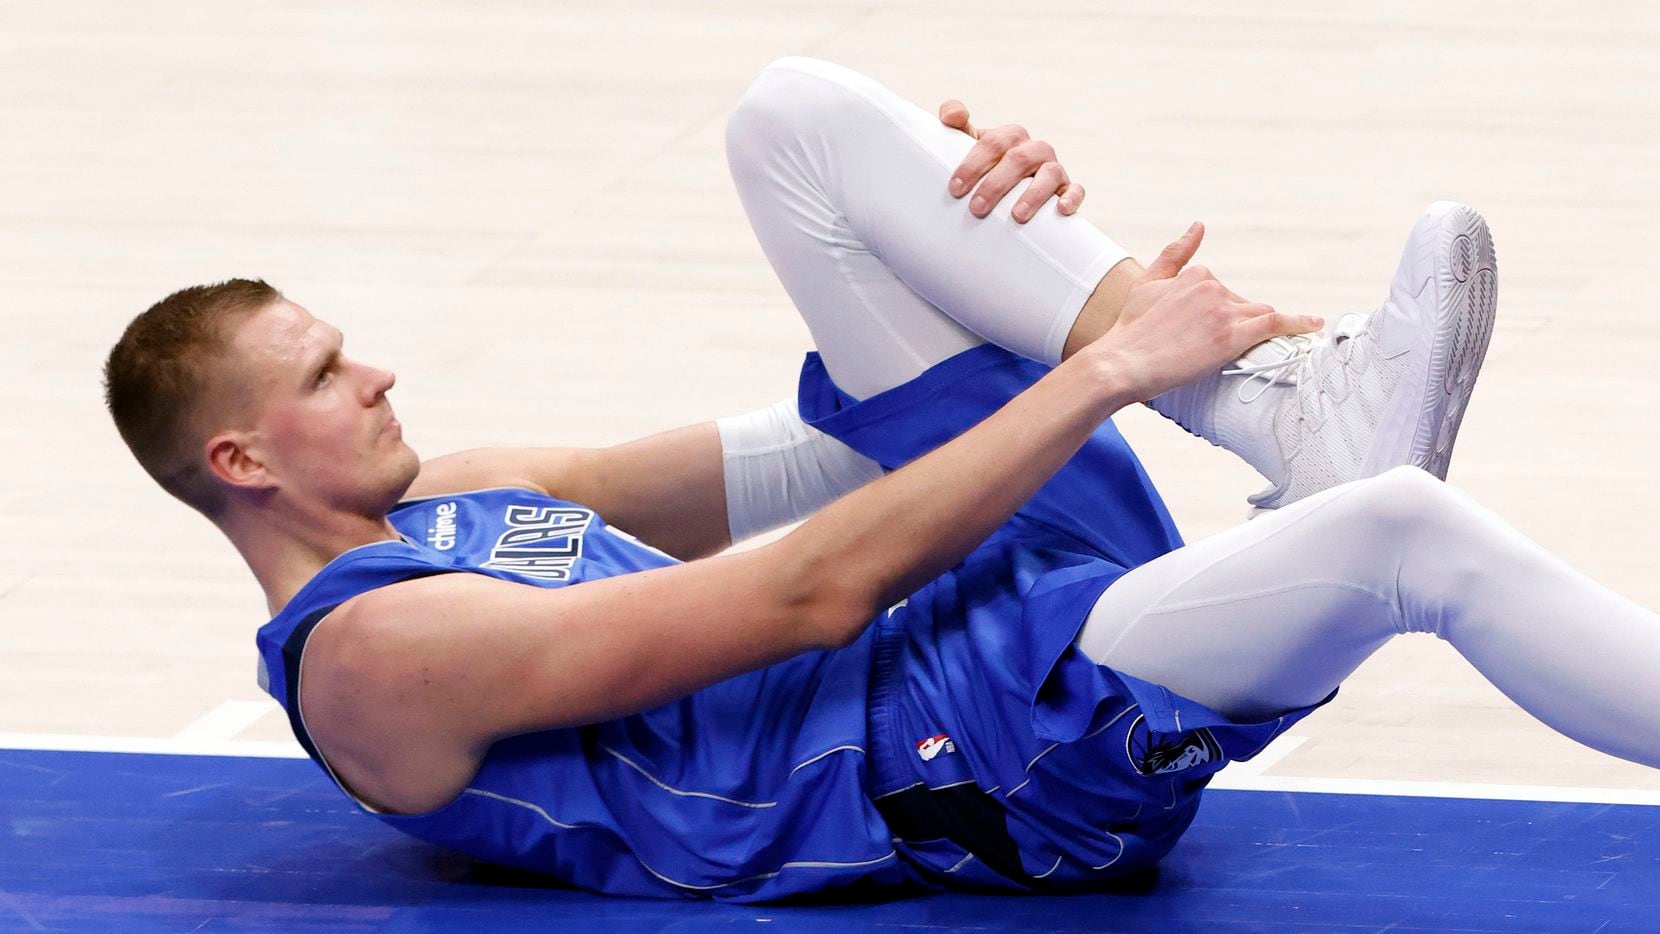 Dallas Mavericks center Kristaps Porzingis (6) grabs his ankle after falling to floor under the basket against the Los Angeles Lakers in the third quarter at the American Airlines Center in Dallas, Thursday, April 22, 2021. Porzingis limped off after the play.